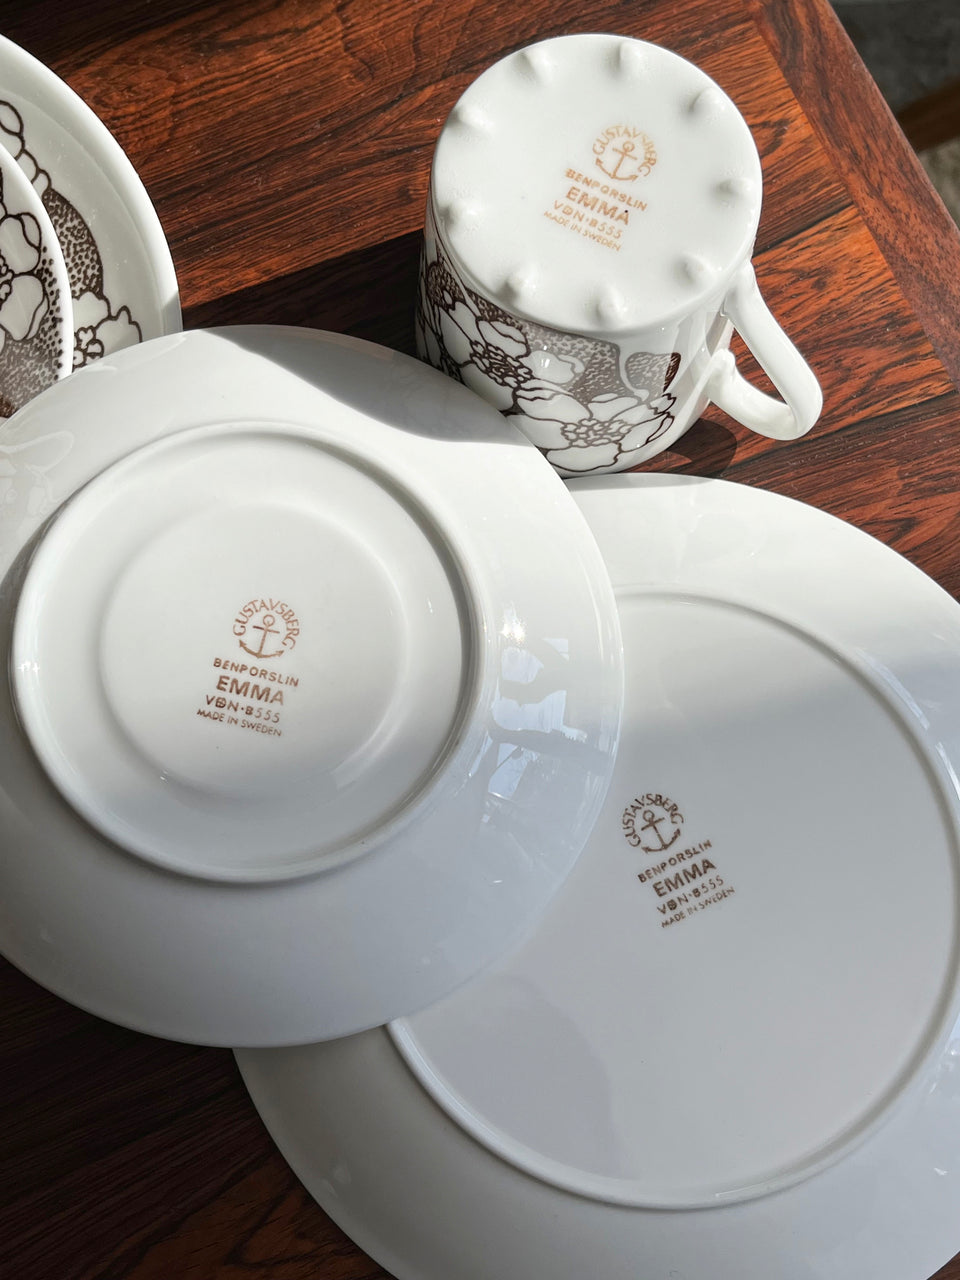 Gustavsberg EMMA Coffee Cup and Saucer Plate/グスタフスベリ コーヒーカップ&ソーサー プレート スウェーデン 北欧ヴィンテージ食器